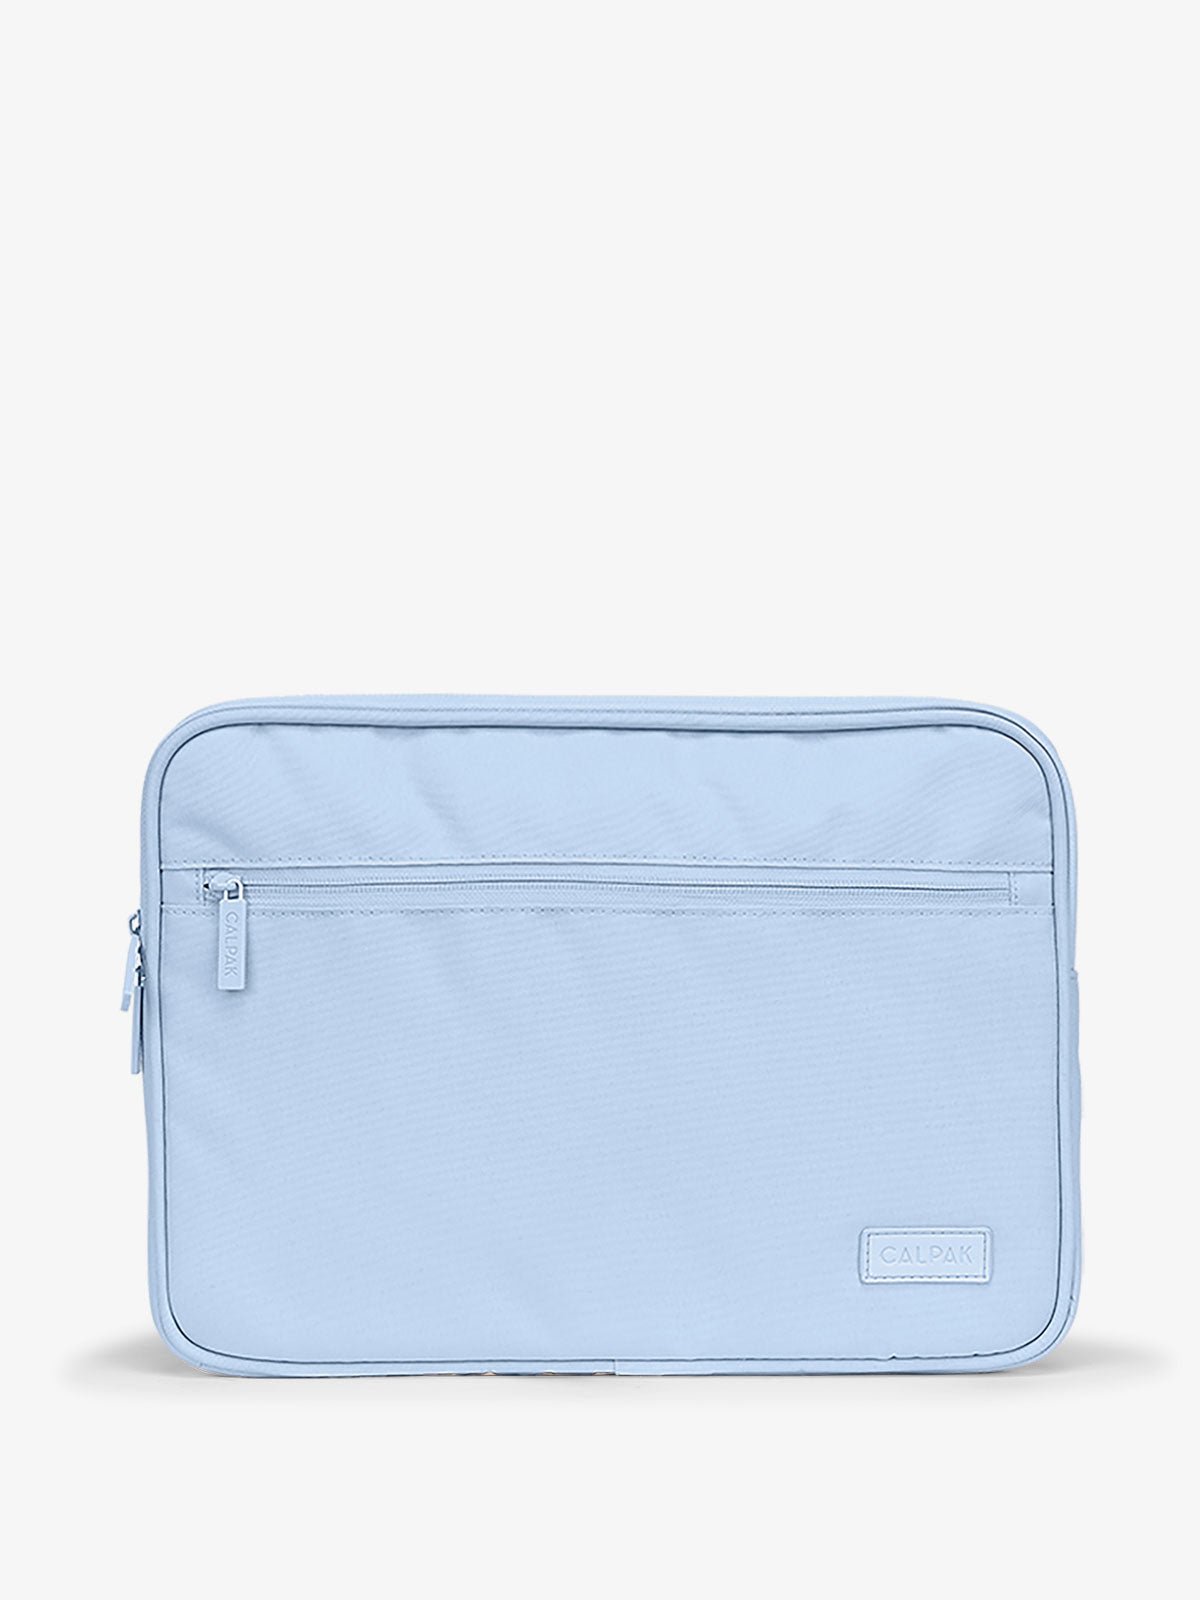 CALPAK 13-14 Inch Laptop Case with zippered front pocket in sky blue